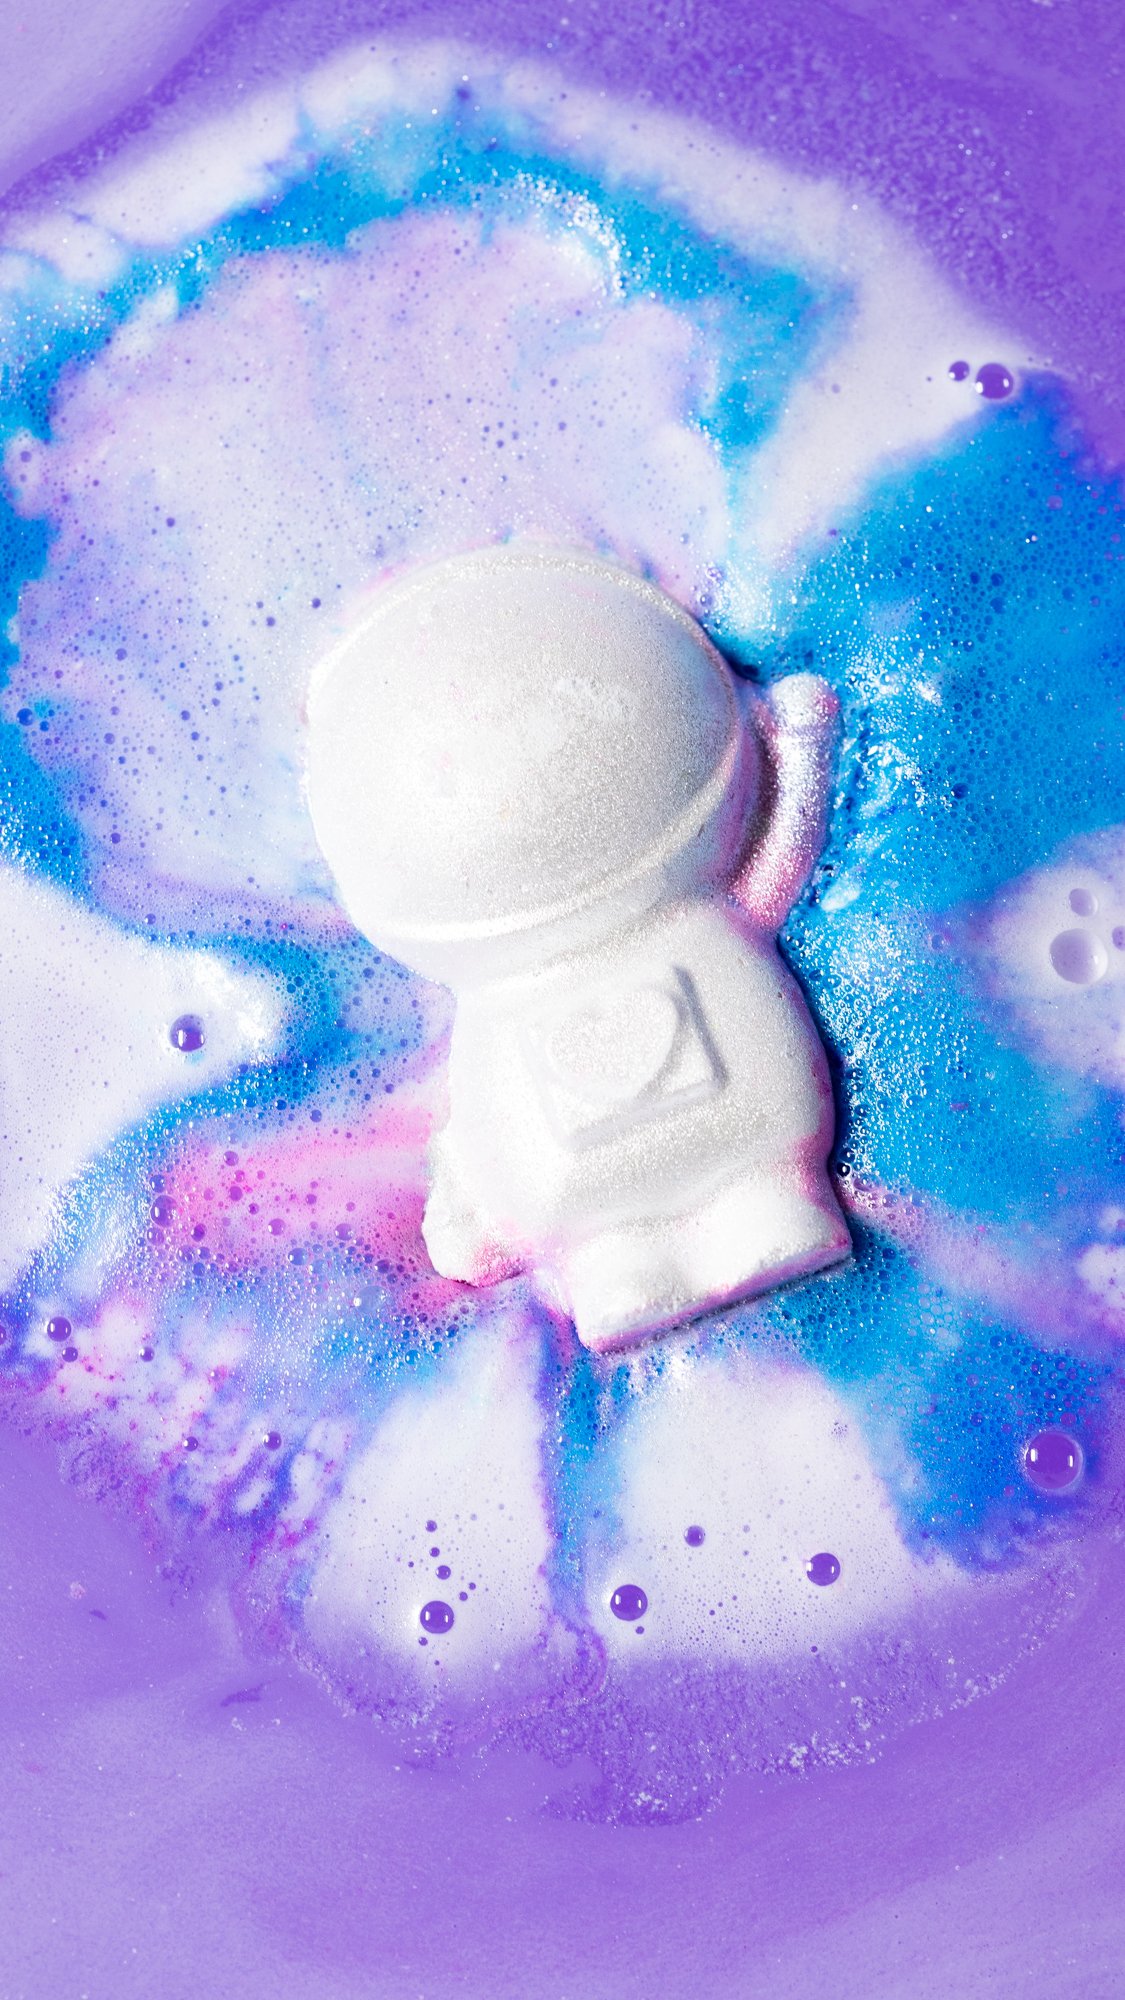 The Bath Bomb sits in the bath surrounded by foamy swirls of pink, purple and blue.